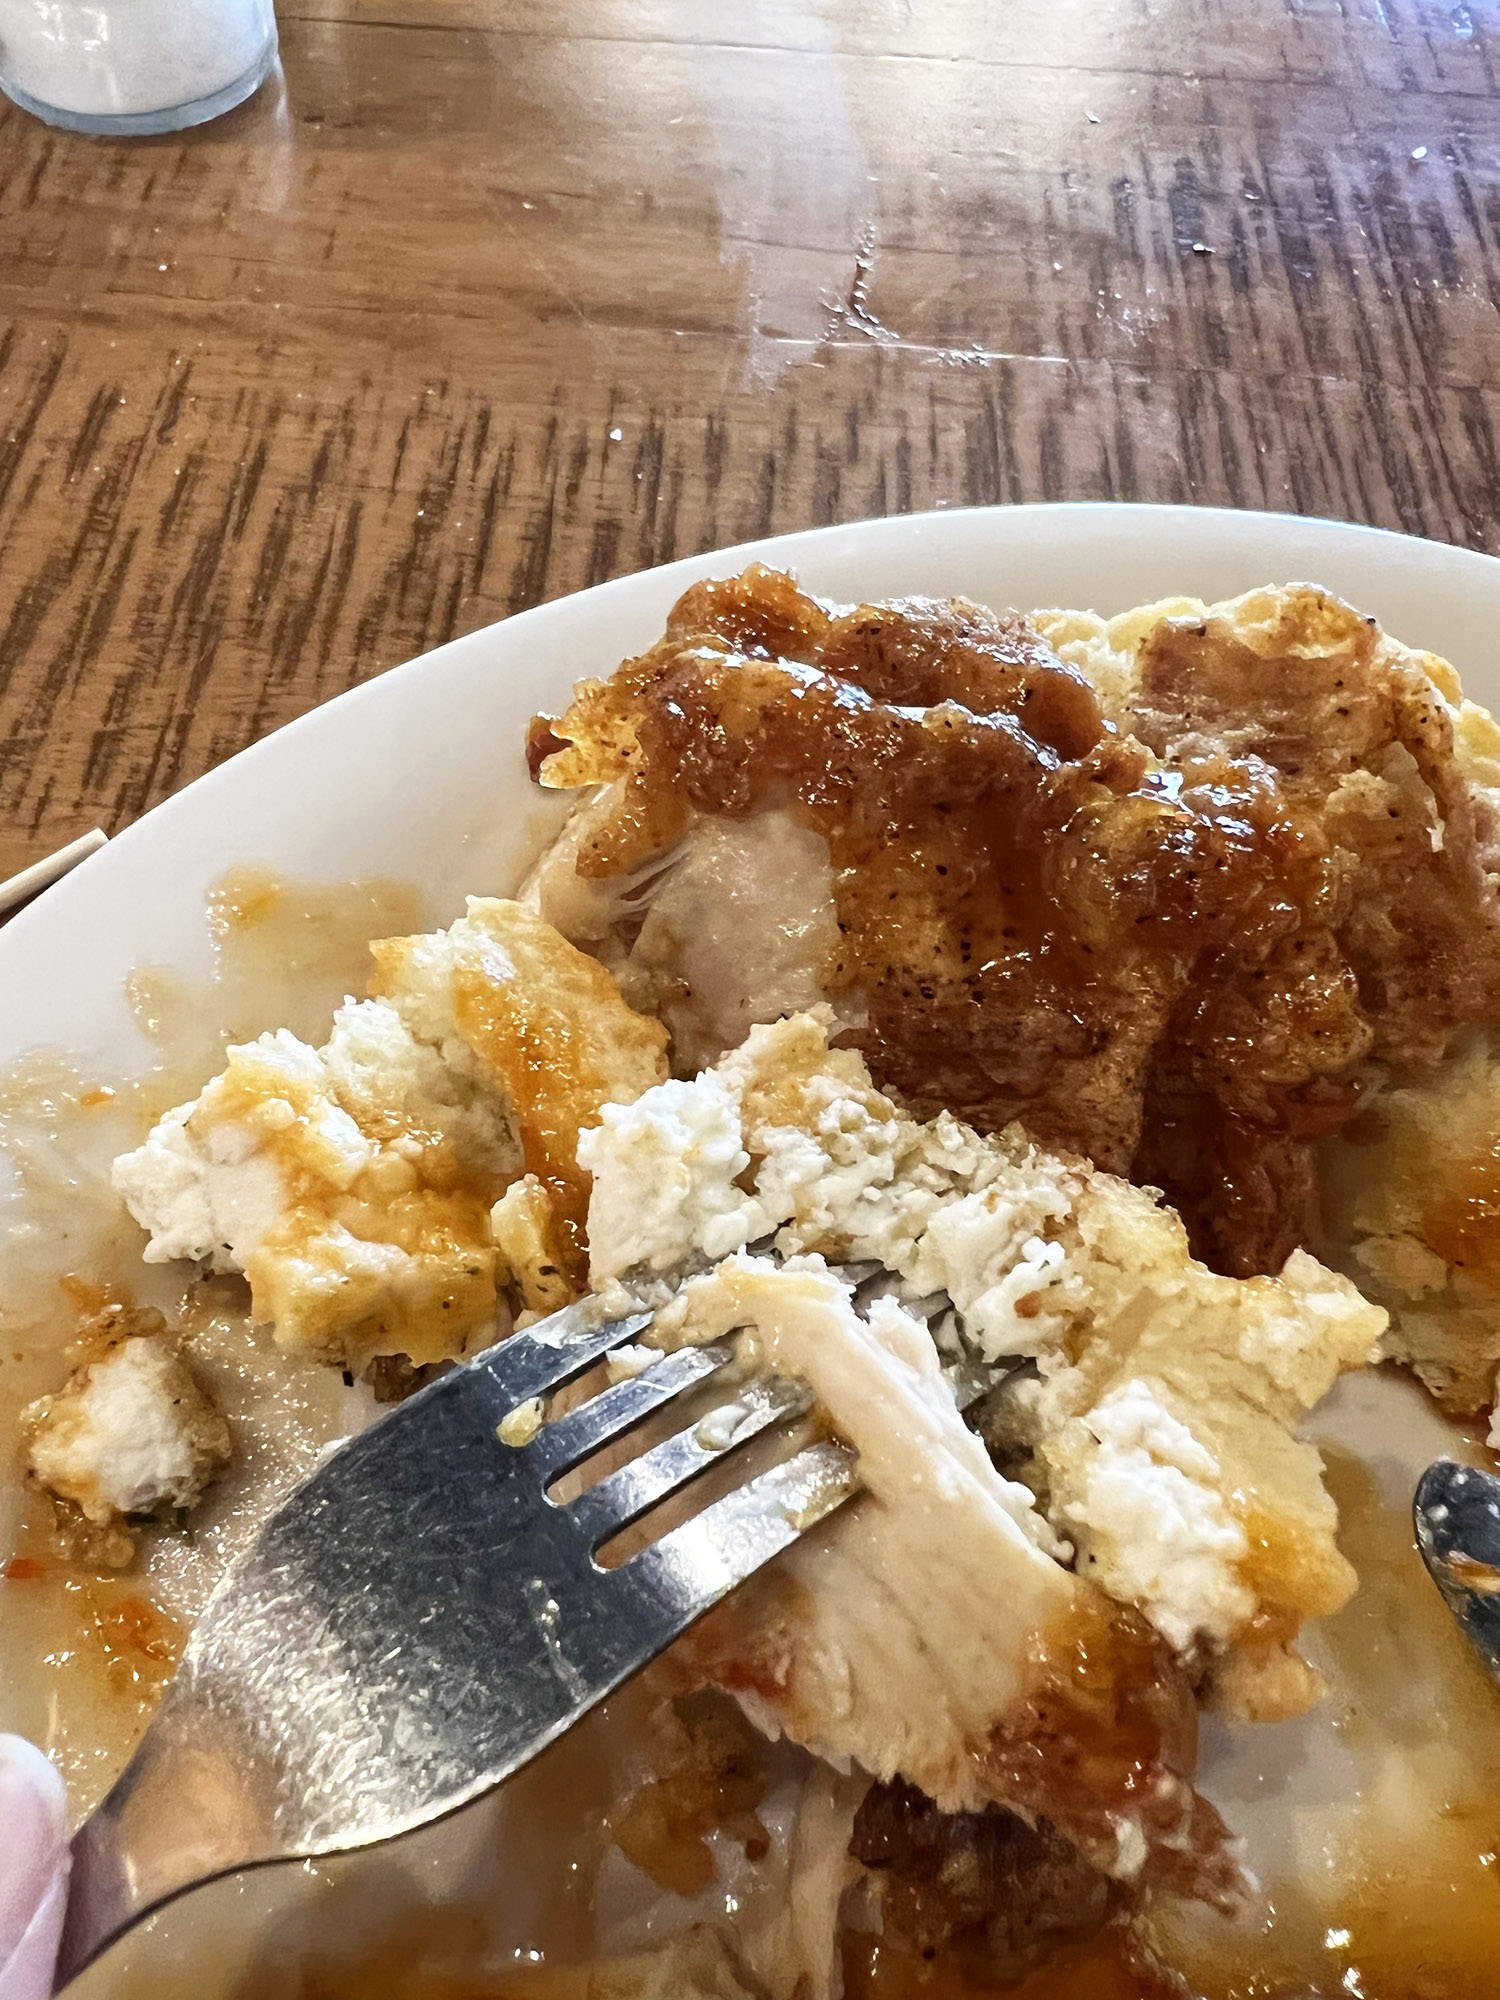 Greenville: The Squawking Goat at Maple Street Biscuit Company